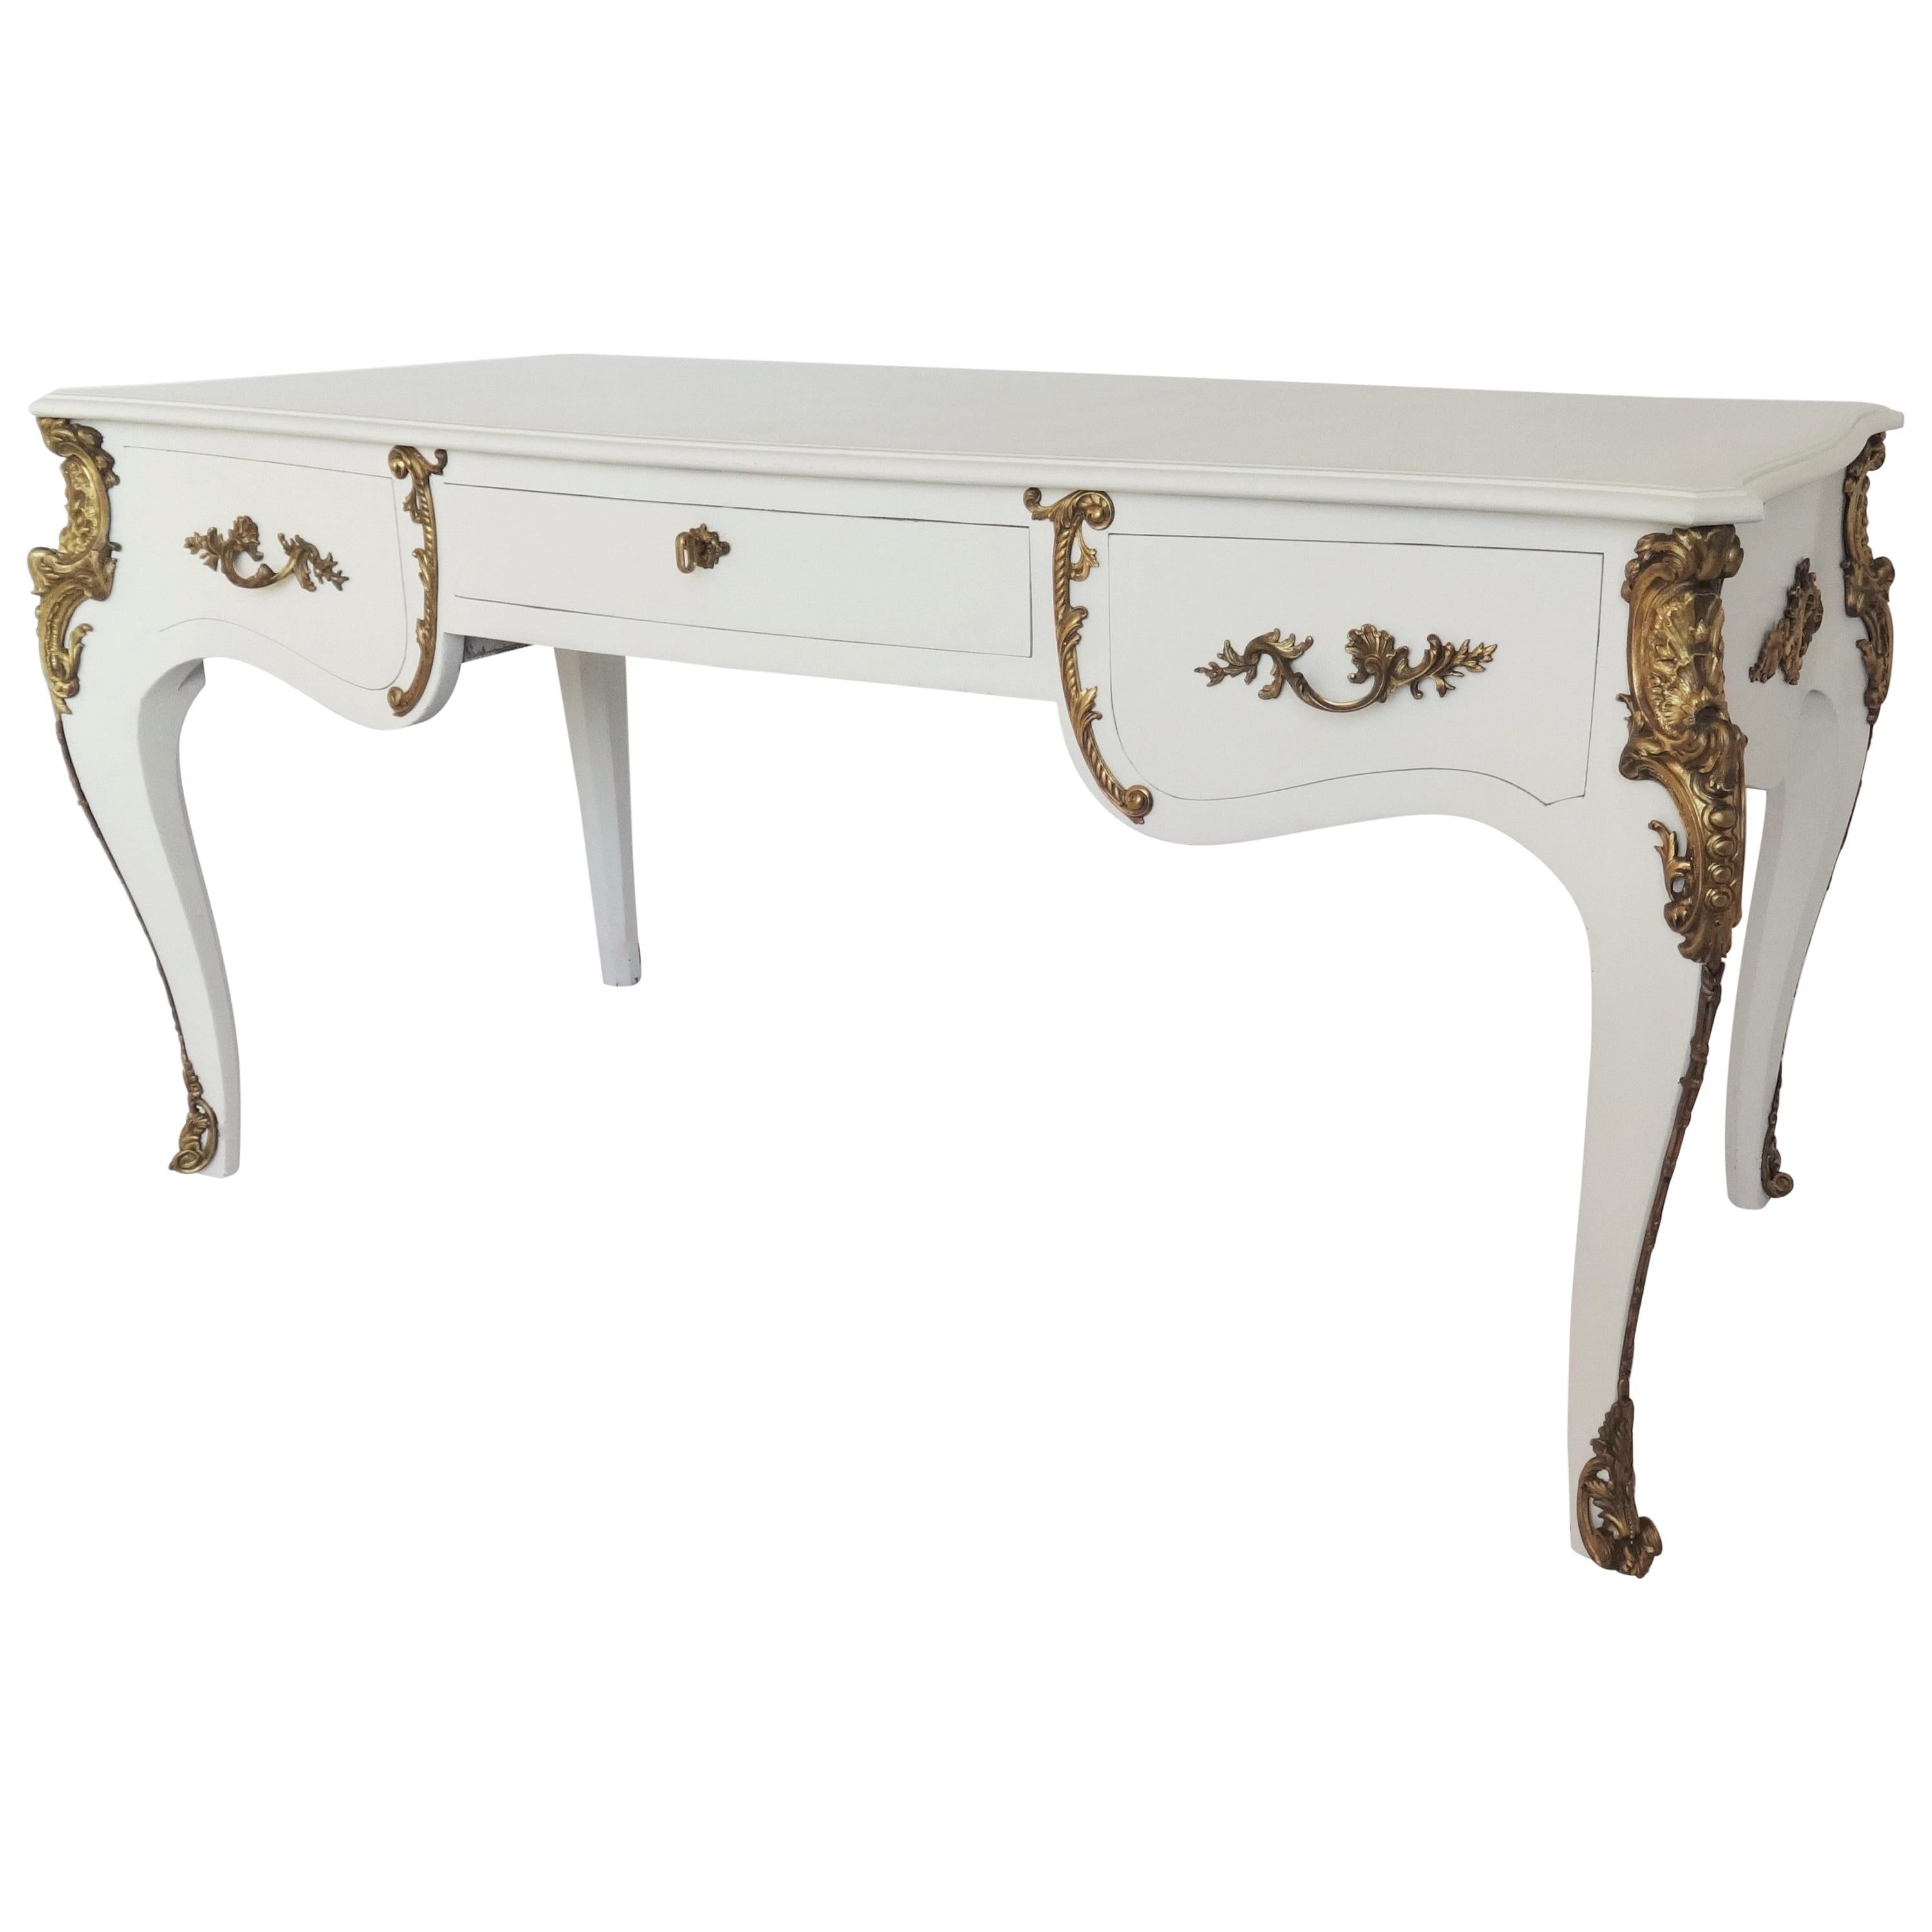 Louis XV Style Lacquered and Gilt Bronze-Mounted Bureau Plat